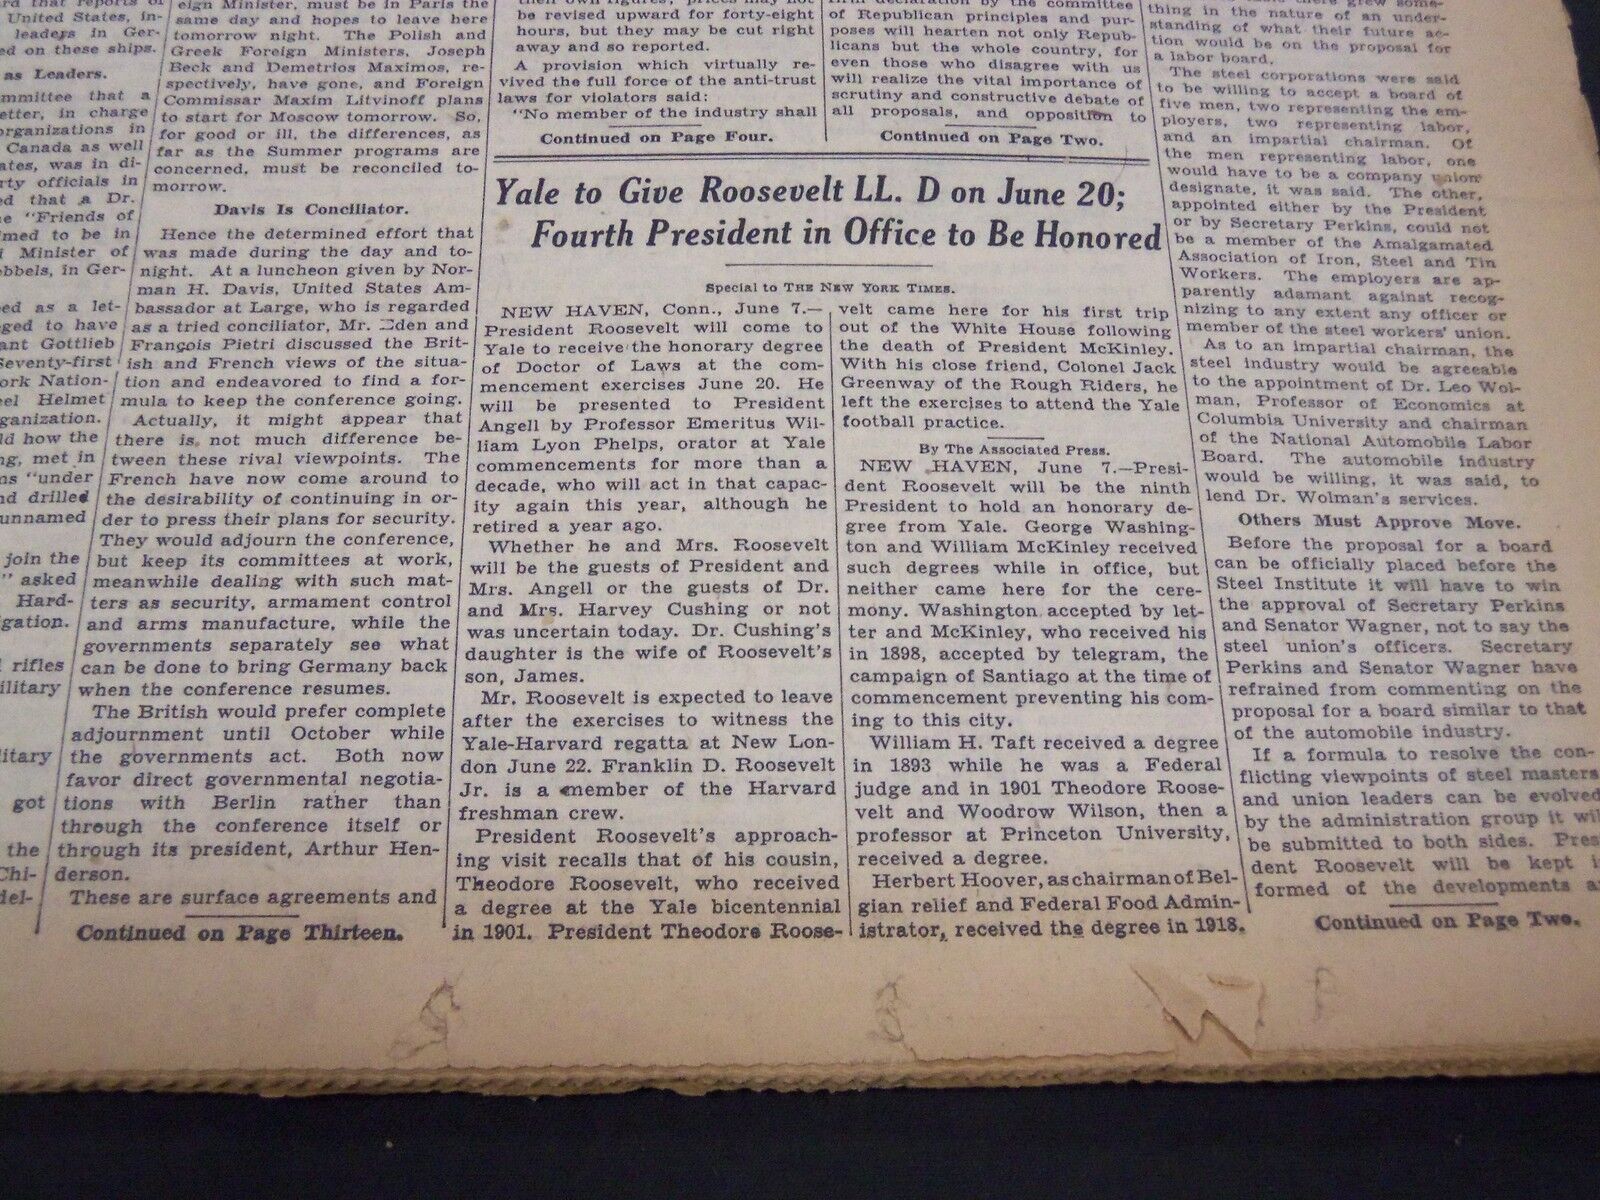 1934 JUNE 8 NEW YORK TIMES - YALE TO GIVE ROOSEVELT LL.D - NT 4206